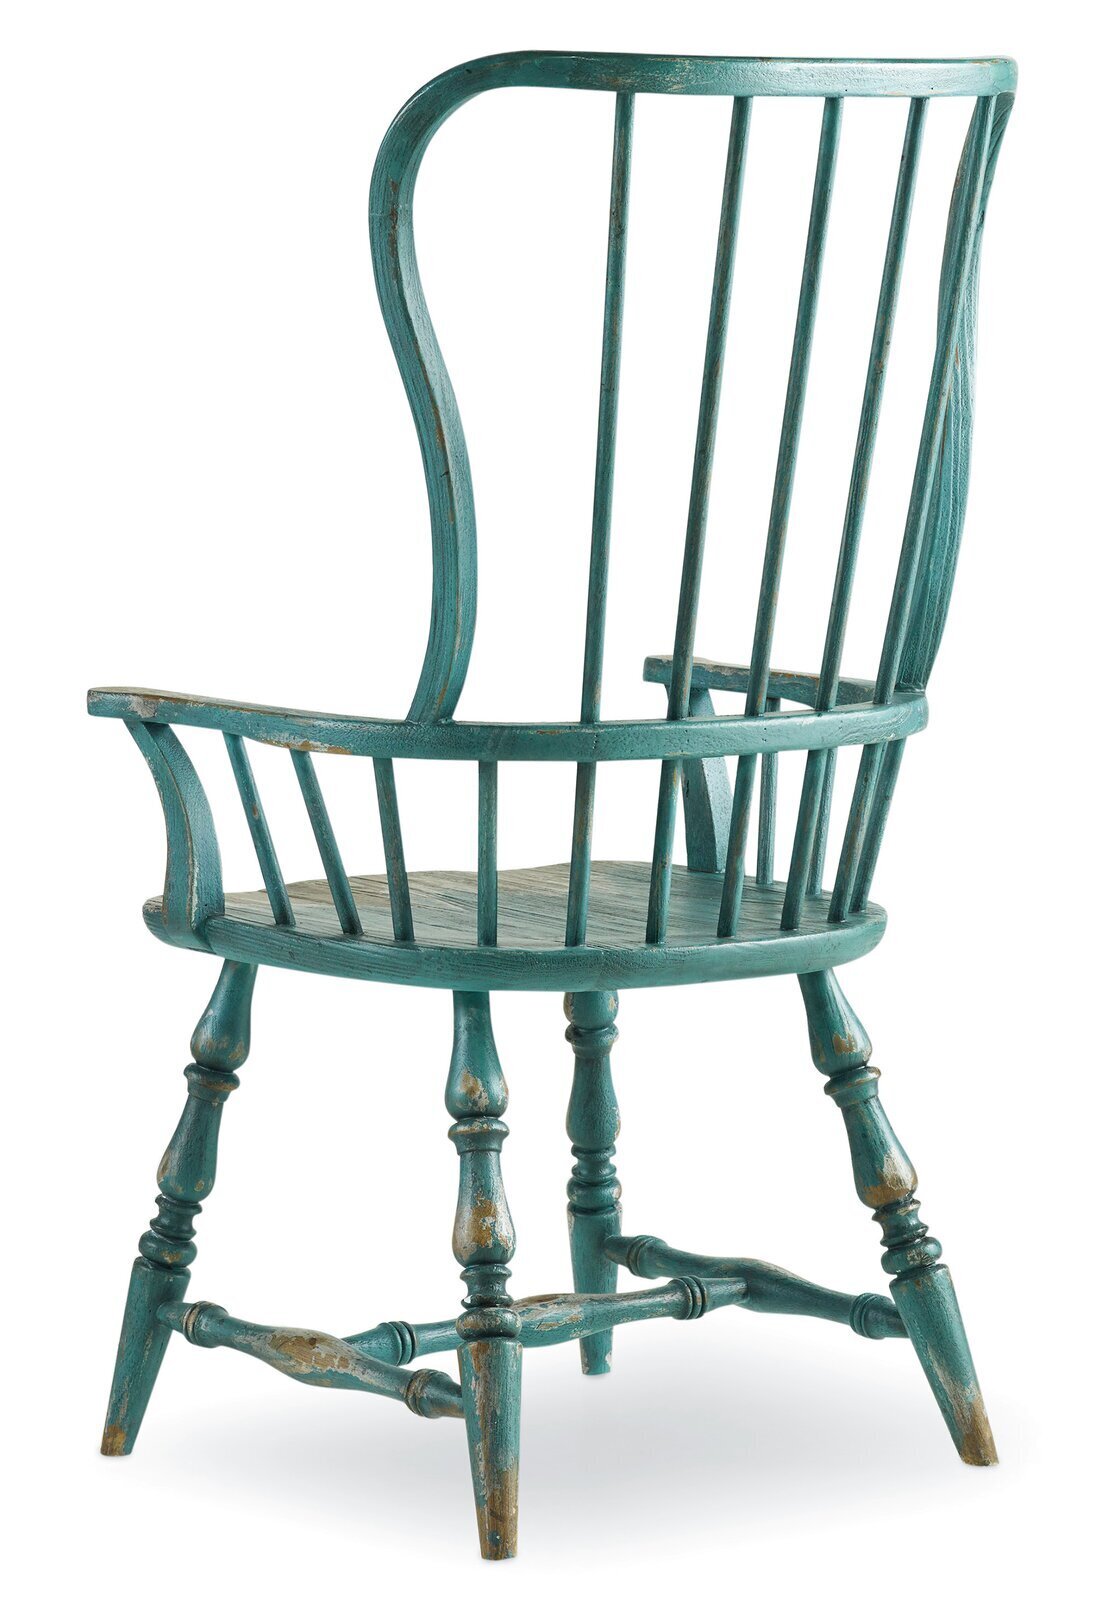 Vintage spindle back chairs in an accent color